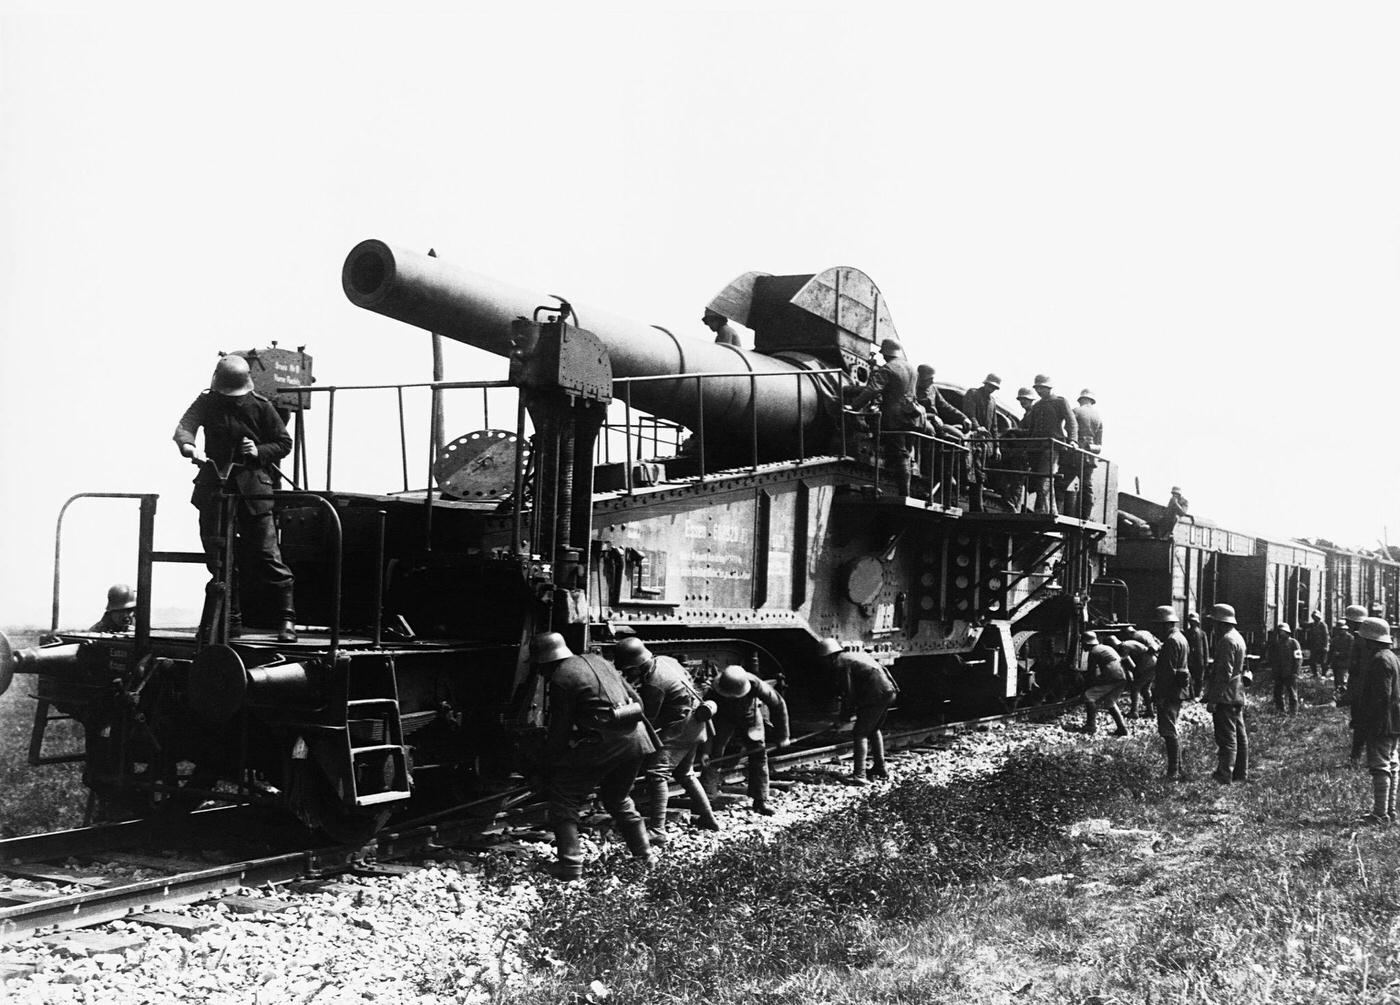 German troops setting the azimuth for horizontal lay on a 28 cm rapid-firing gun mounted on a train.